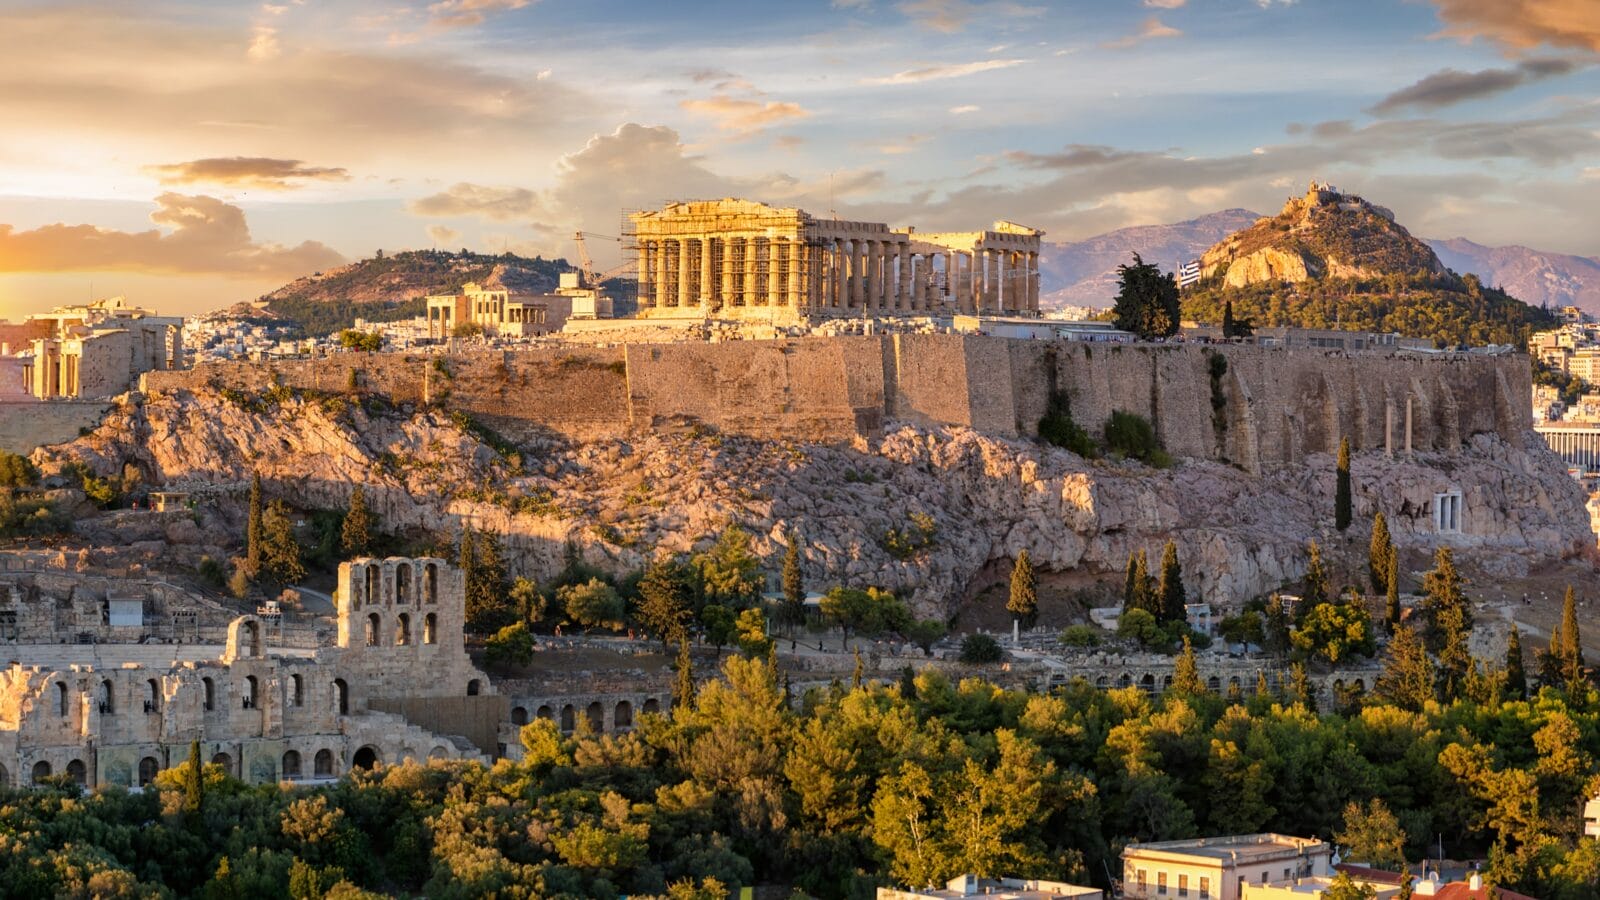 <p>Located in Athens, Greece, the Acropolis serves as one of Ancient Greece’s most note-worthy landmarks.</p><p>Once a religious hot spot and the center of worship, the Acropolis was built in the 5th century BCE in honor of the Greek gods after the Greeks’ major victory over the Persians. The place features several important buildings such as the Parthenon, the Propylaea, the Temple of Athena Nike, and the Erechtheion.</p>